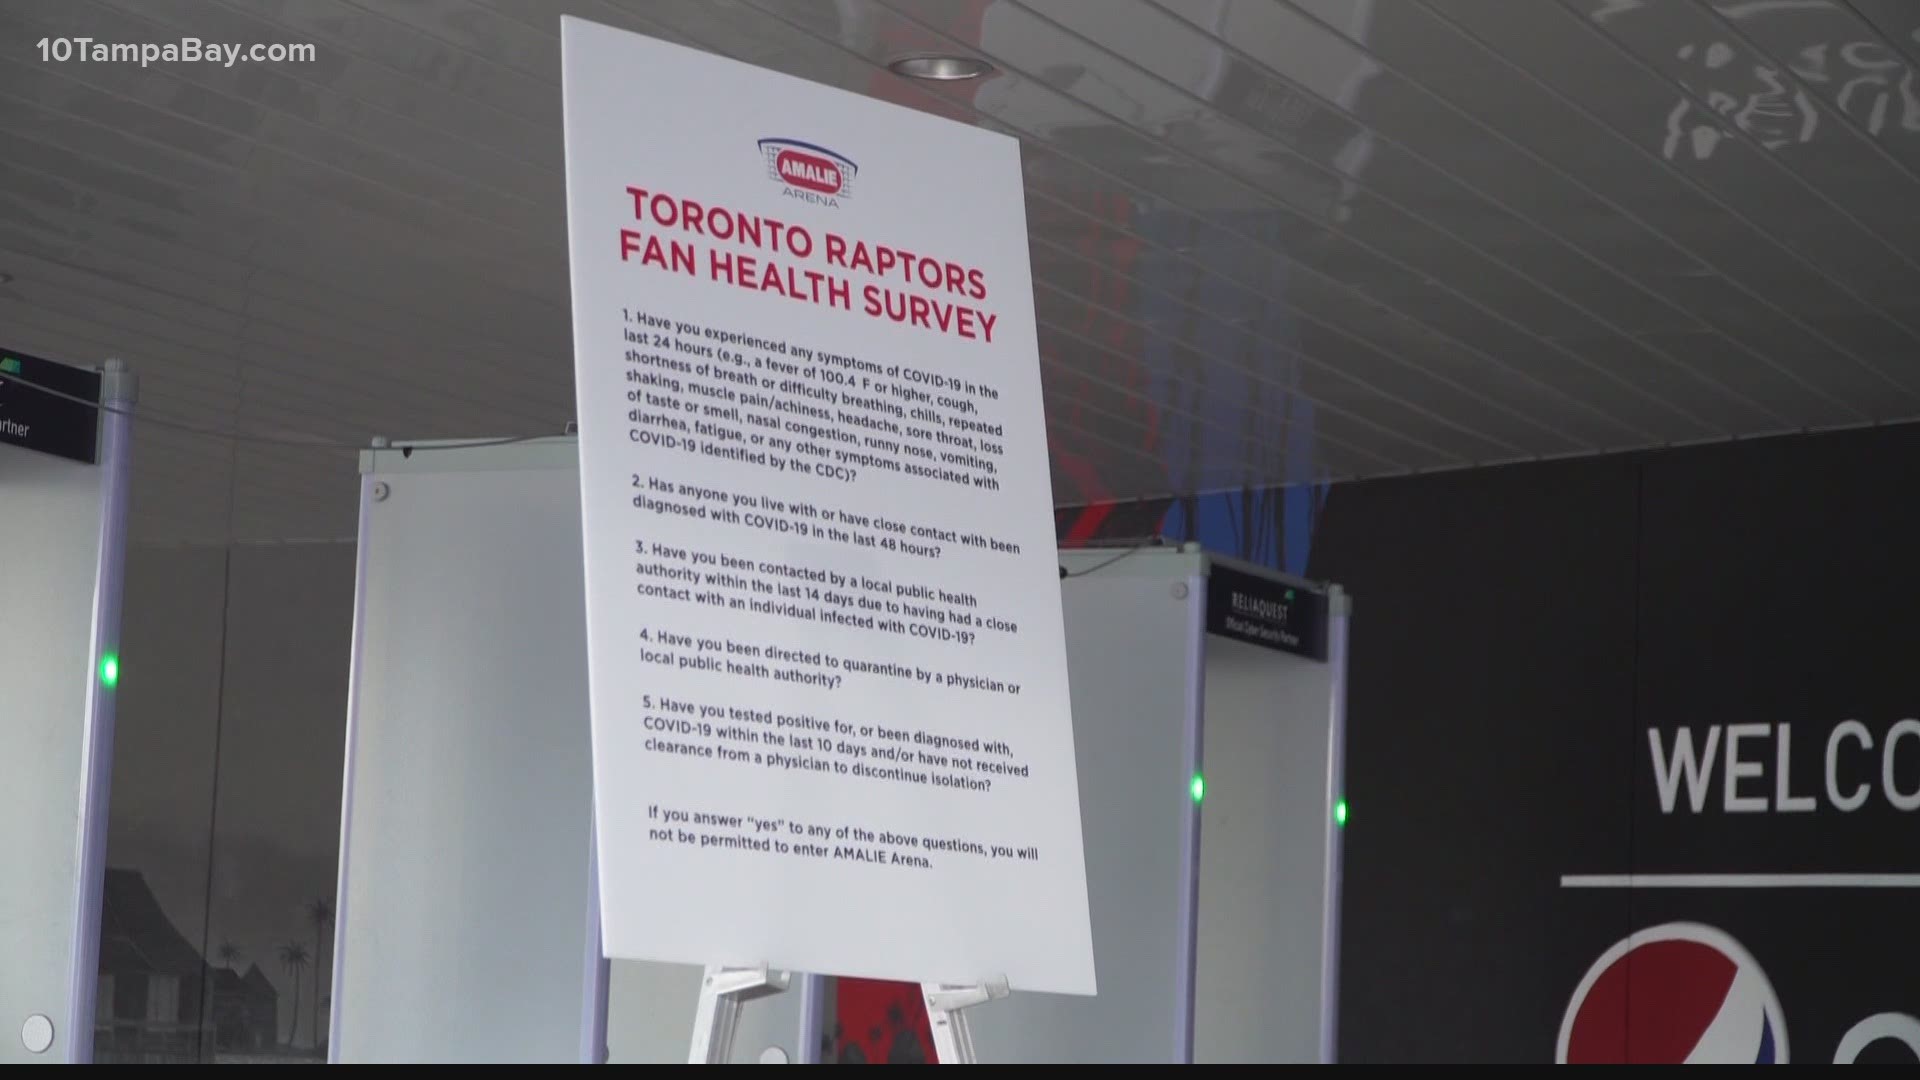 The Toronto Raptors are playing their home games at Amalie Arena until they're cleared to play in Canada again.